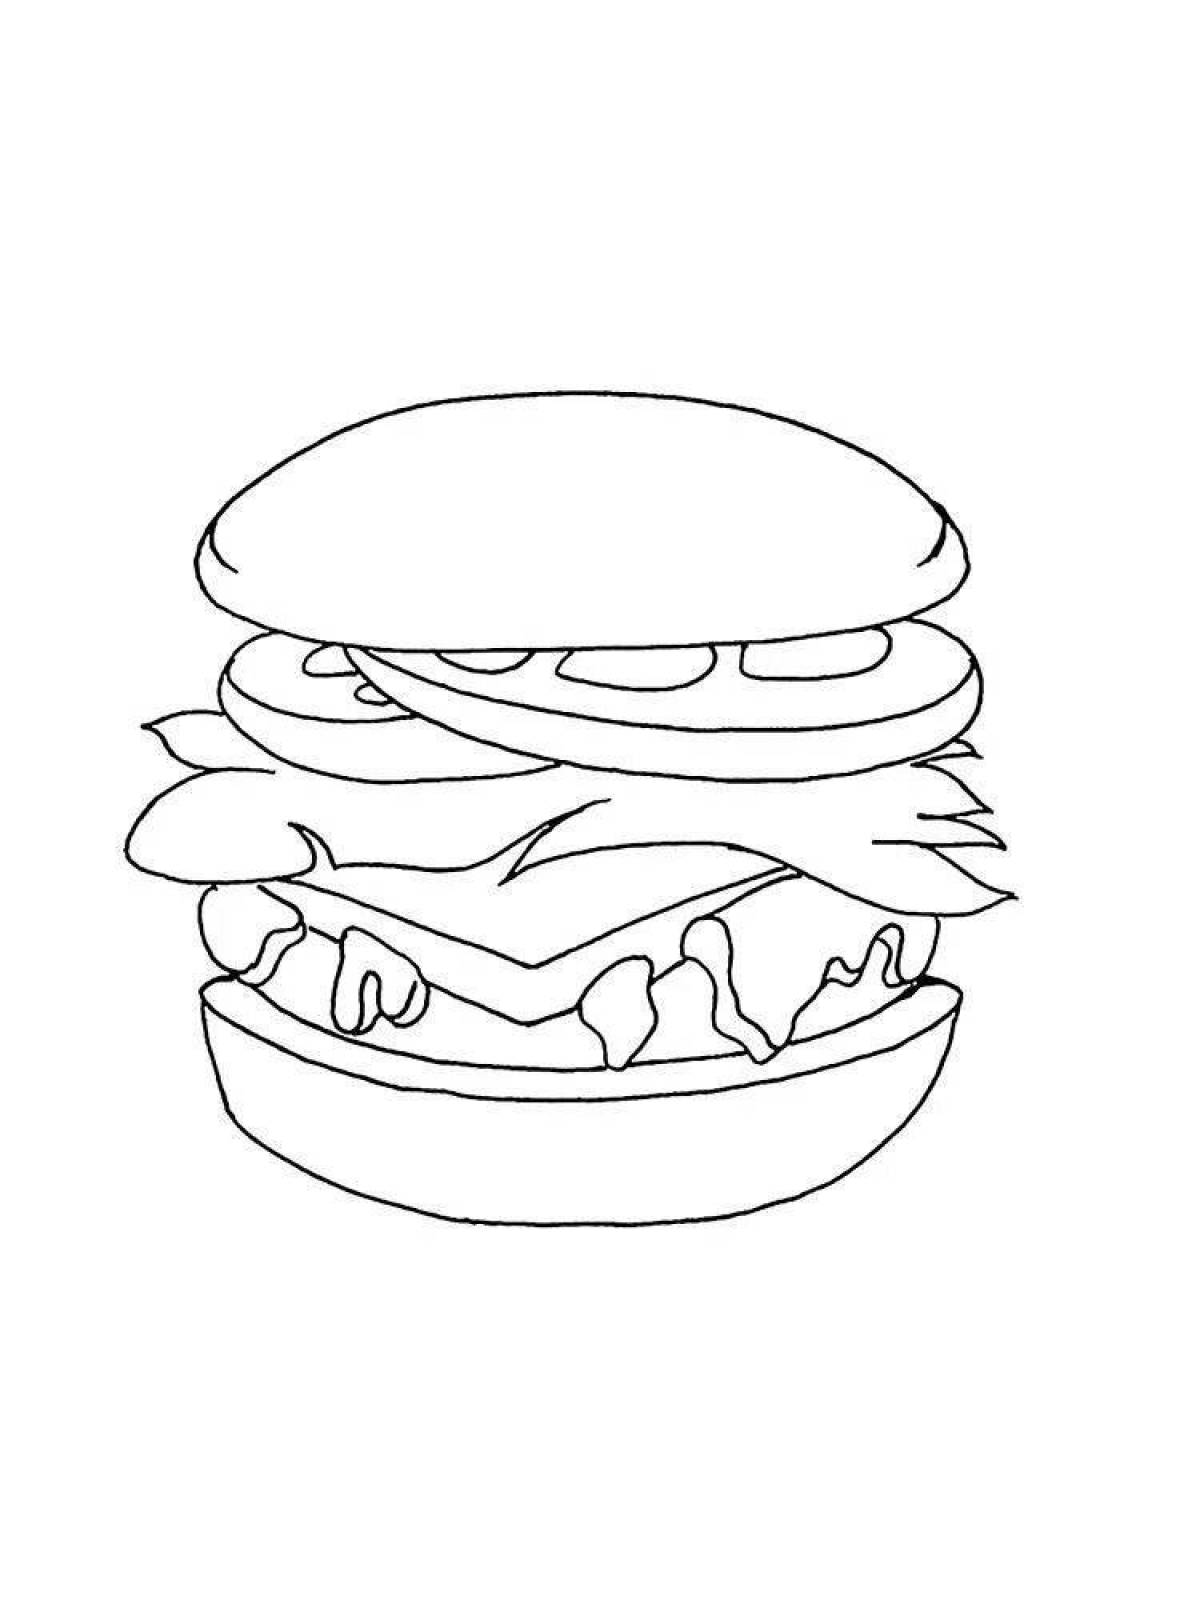 Lovely burger coloring book for kids